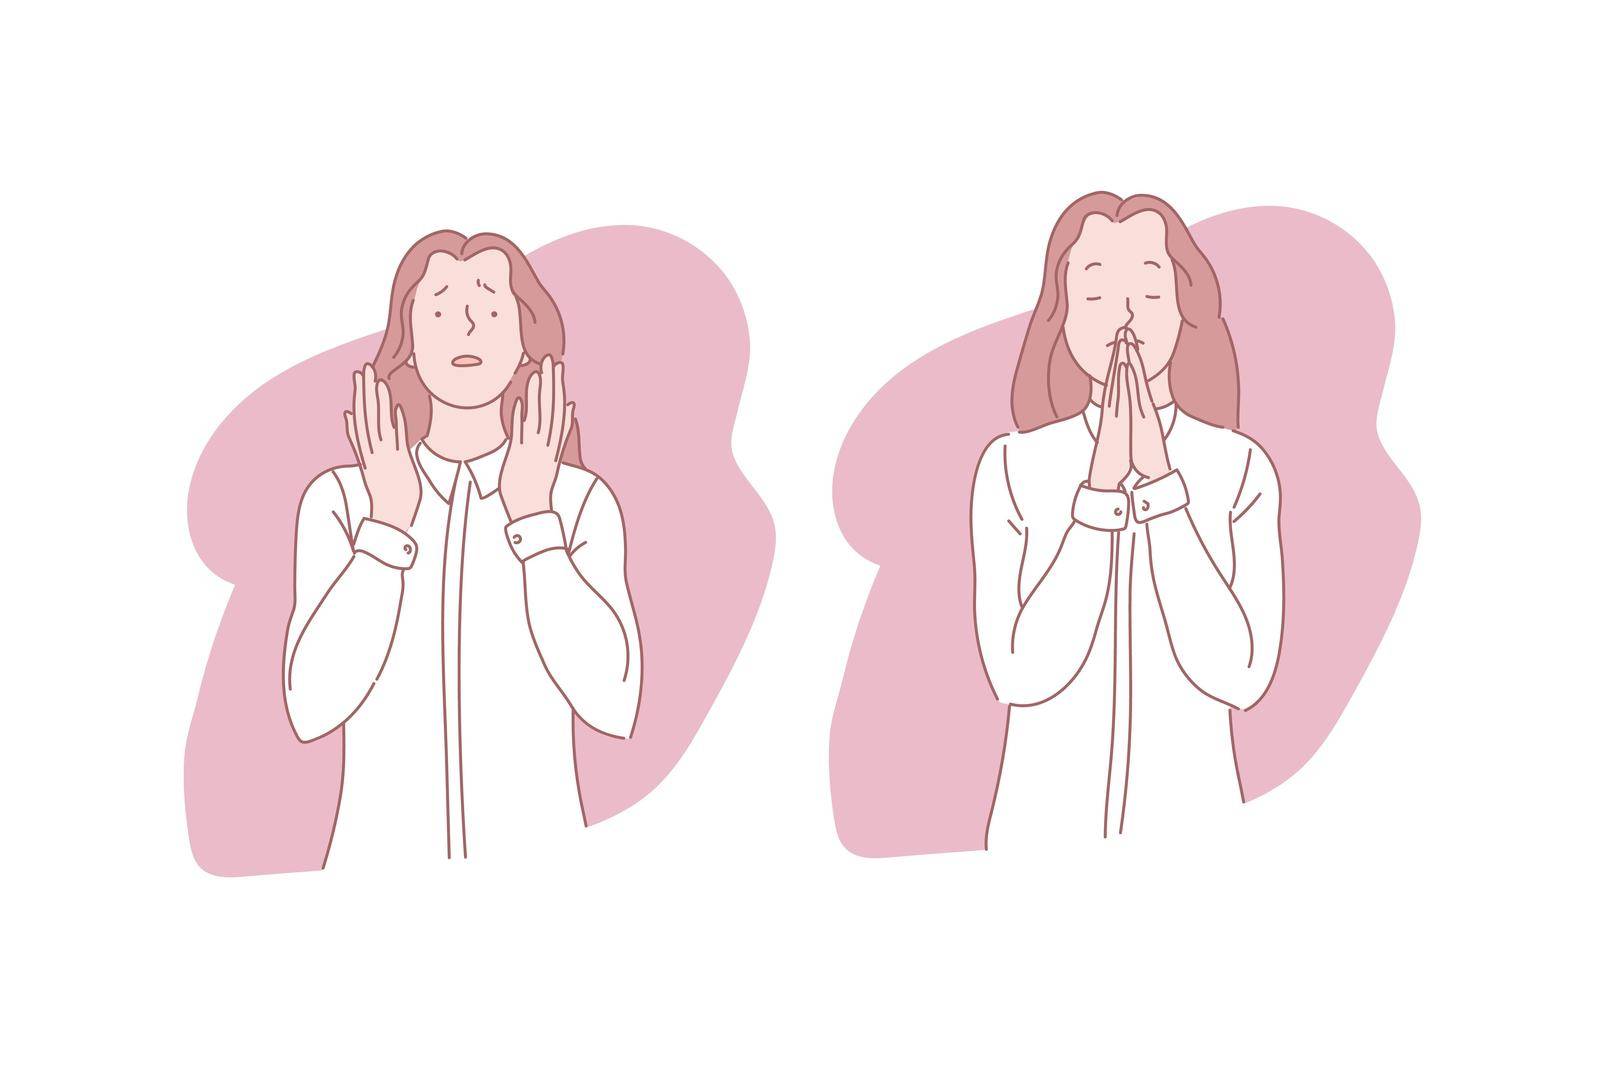 Pray, orison, verbal and silent appeal concept. Gesture, emotionality, religion, belief, hope and faith, young woman talking to god, girl folding hands for prayer. Simple flat vector